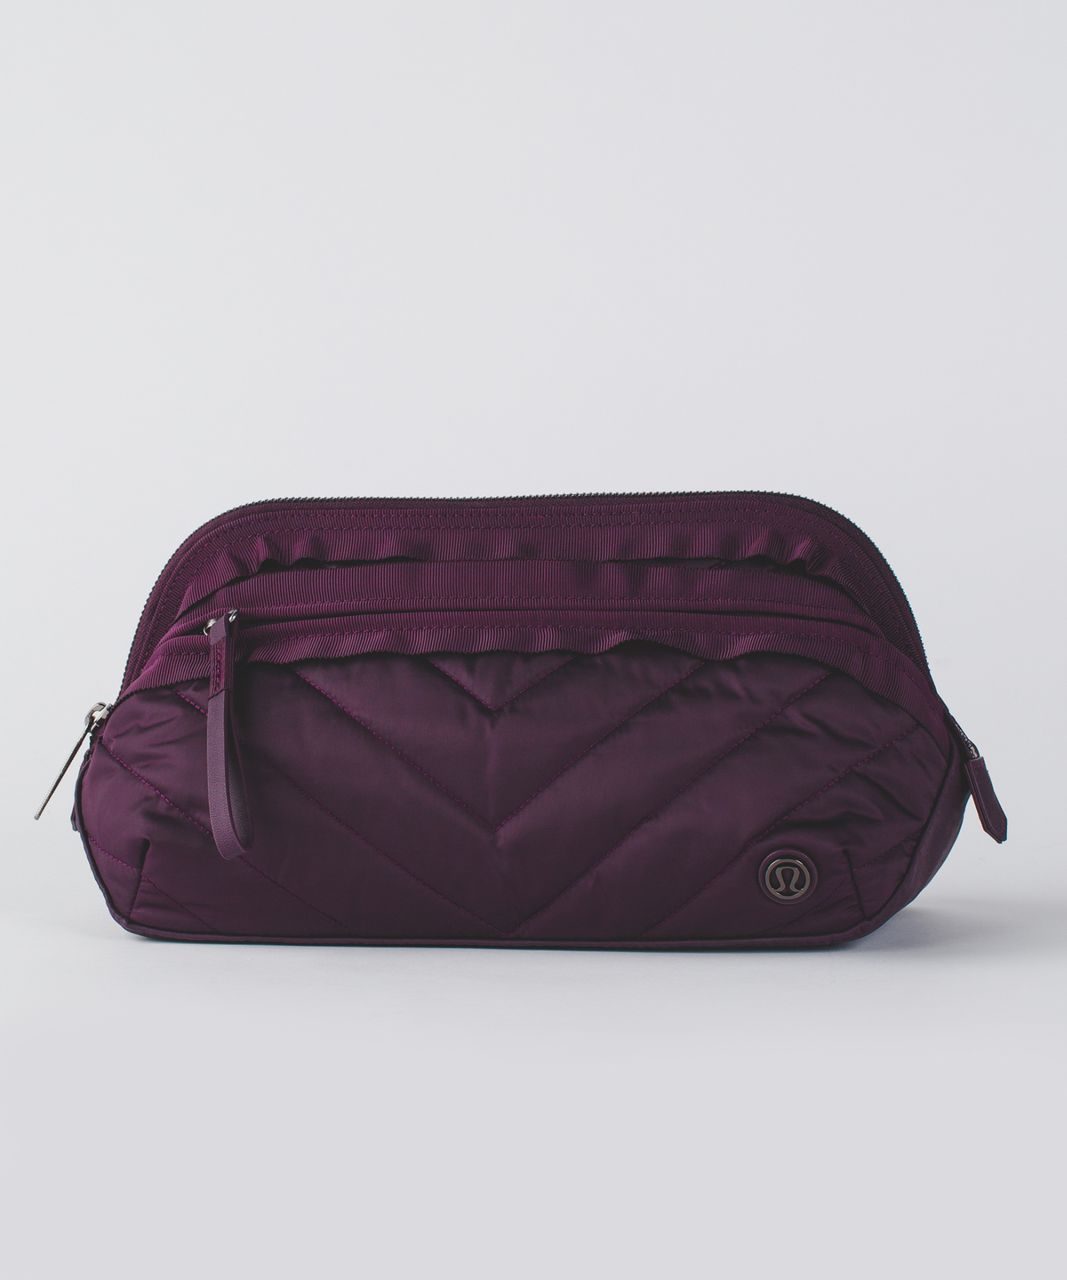 Lululemon Dont Sweat It Kit (Quilted) - Black Cherry